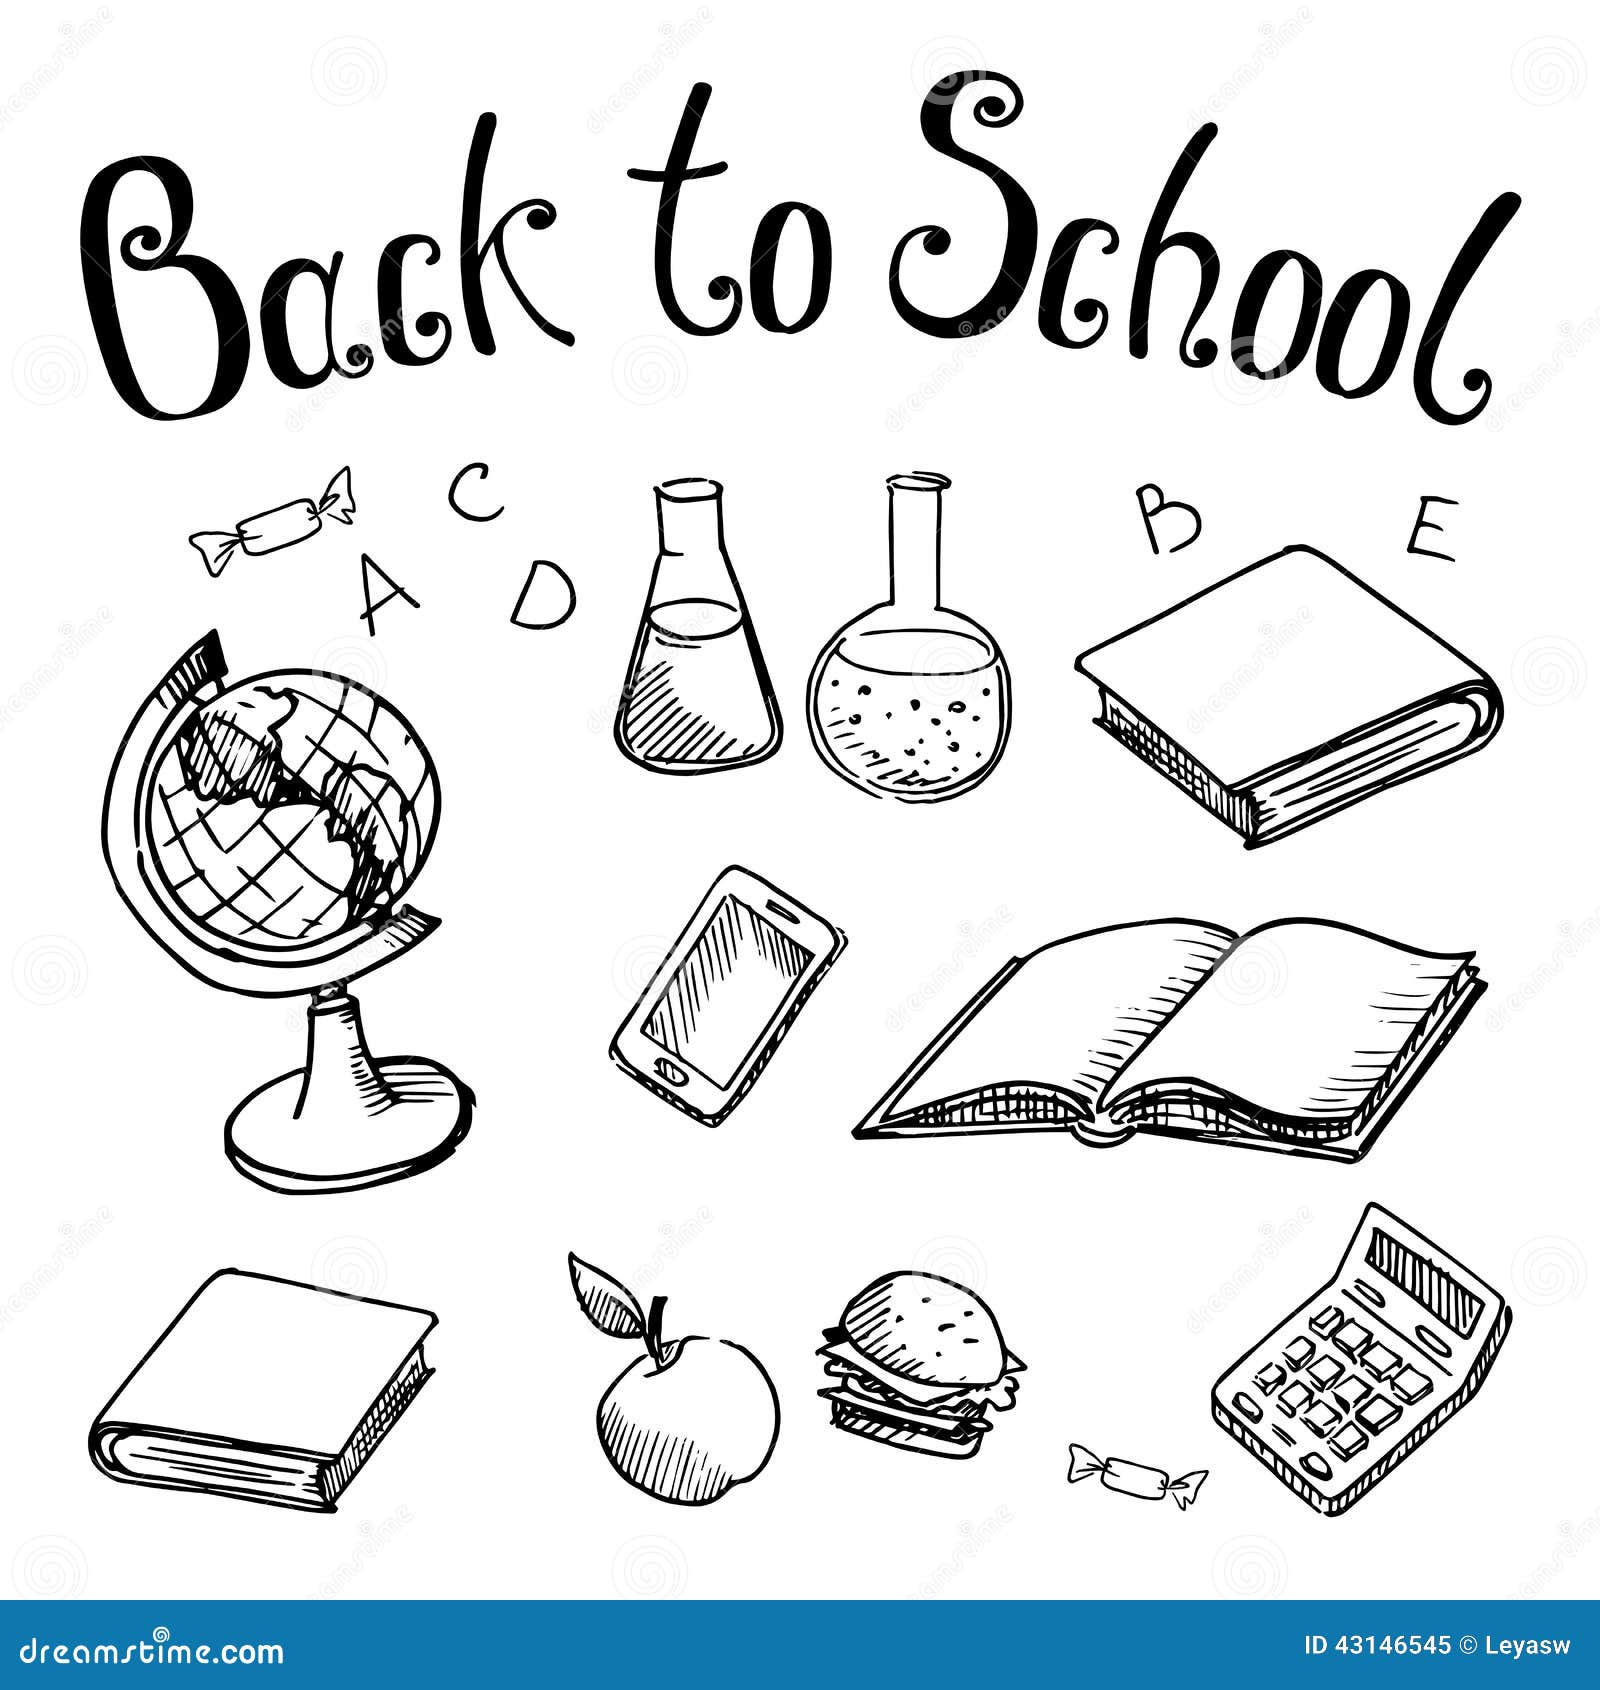 Back To School School Subjects On On A White Background Stock Vector Illustration Of Sandwich Graph